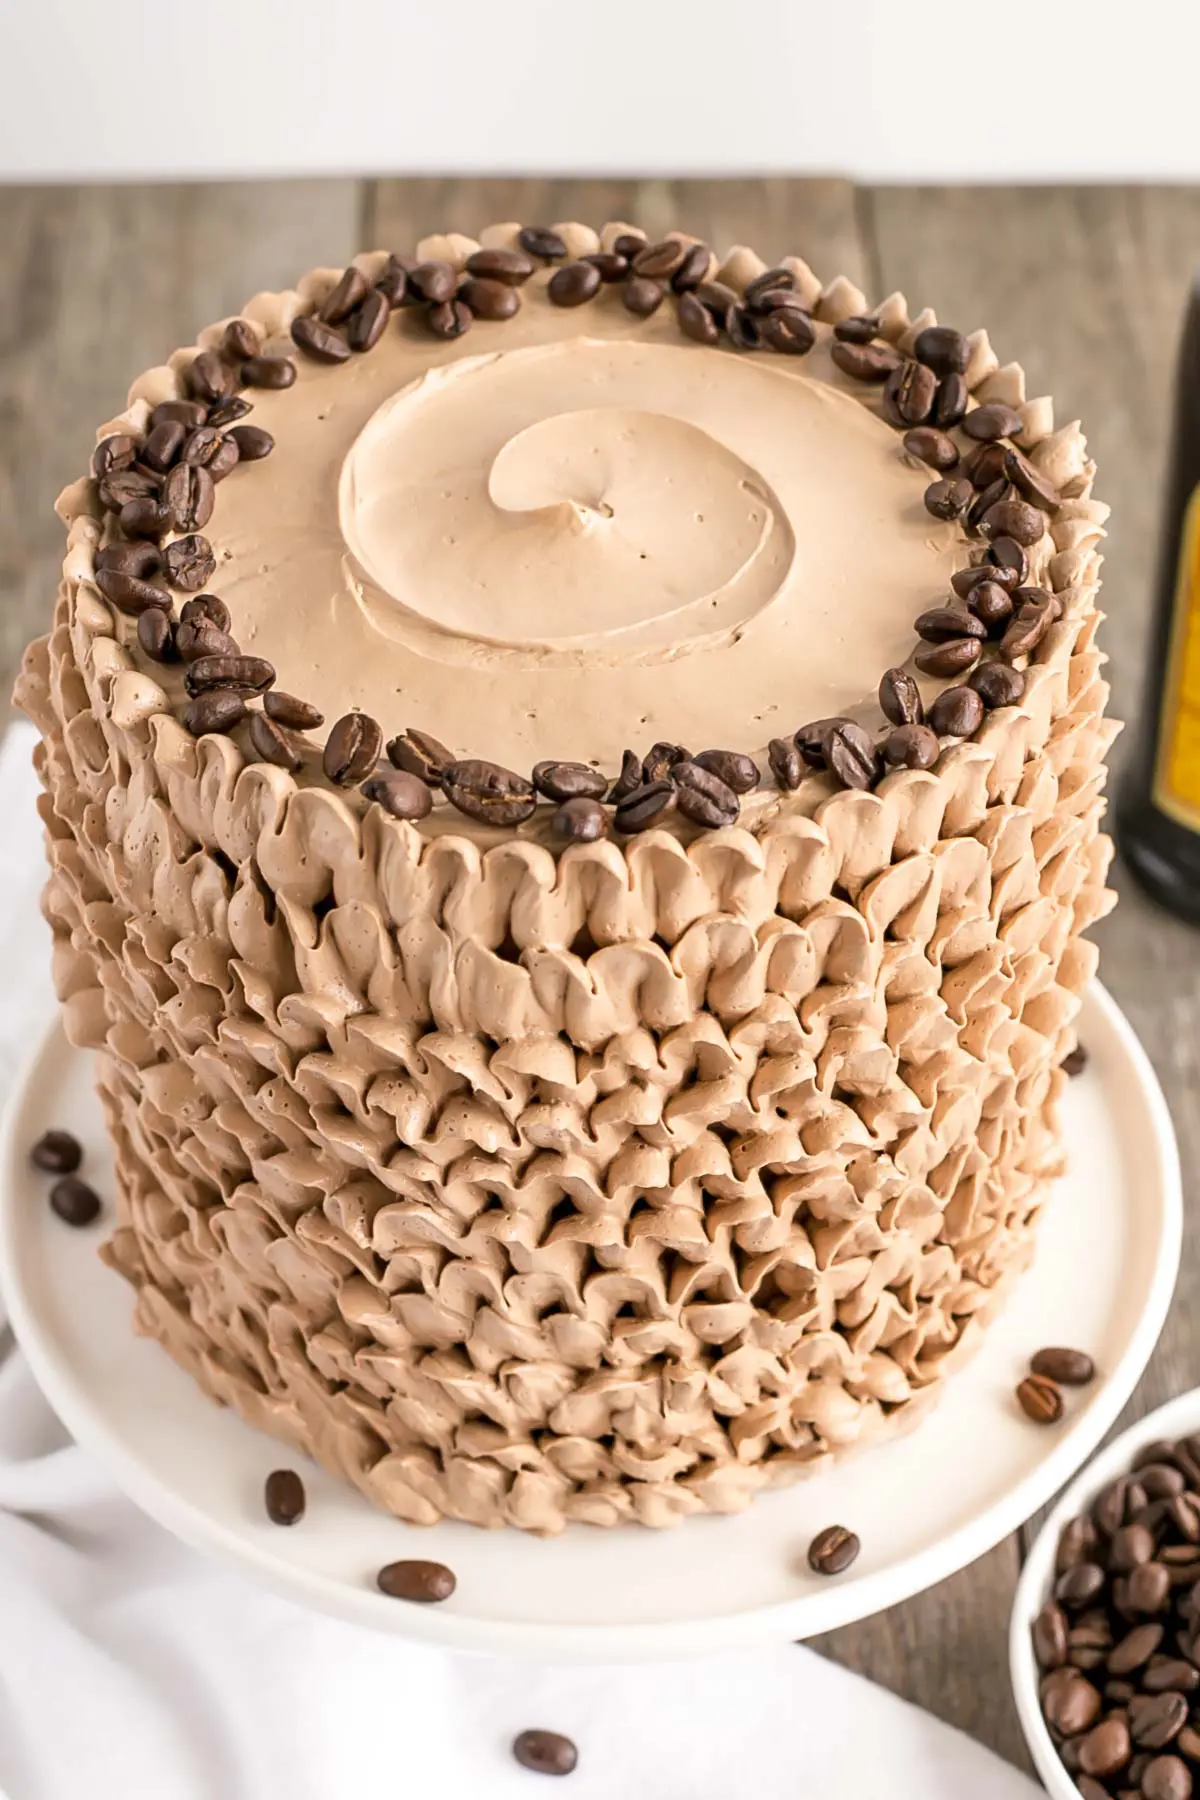 Top view of the cake with a frosting swirl on top and coffee beans